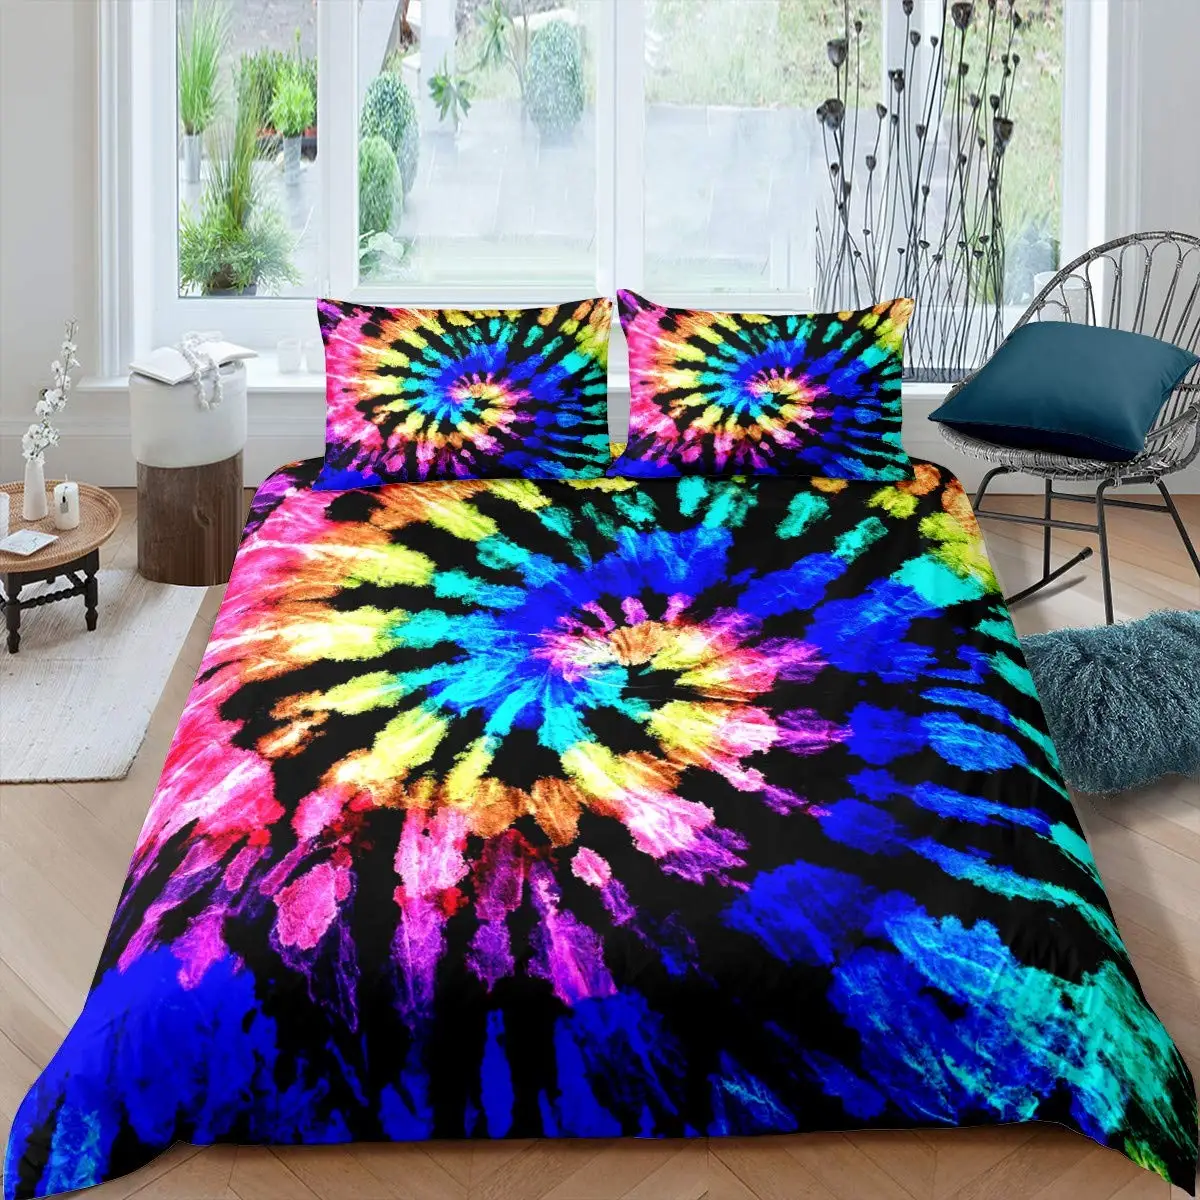 

Bedding Set Microfiber Double Queen King Quilt Cover Tie Dye Duvet Cover Psychedelic Bohemian Gypsy Exotic Spiral Colorful Twin